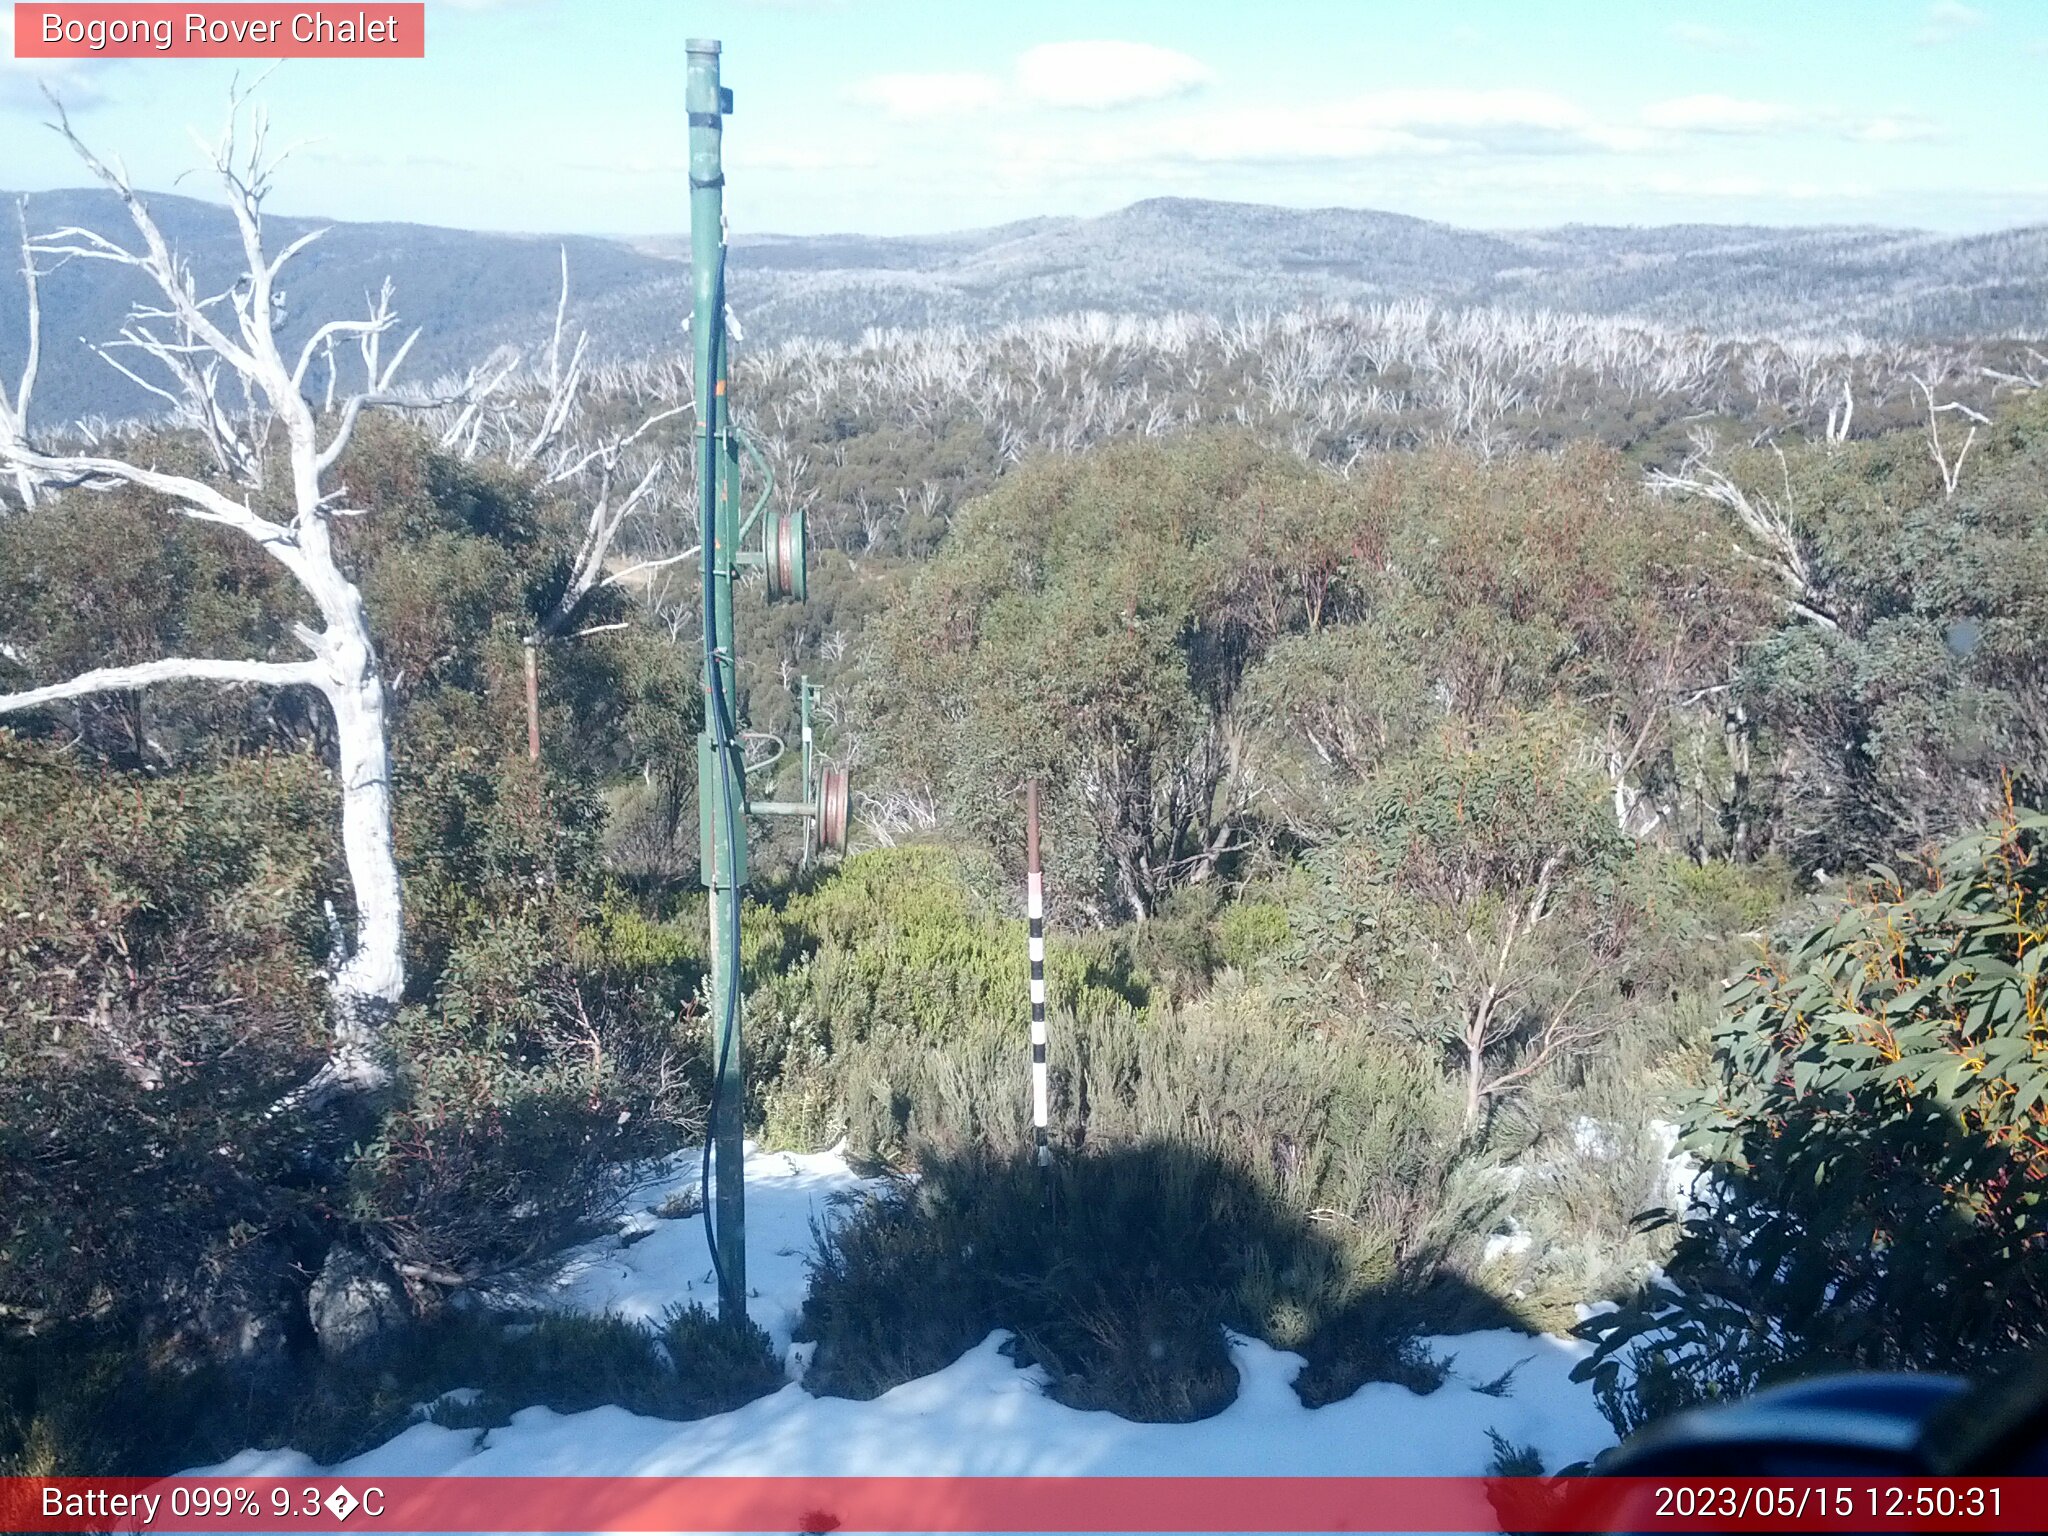 Bogong Web Cam 12:50pm Monday 15th of May 2023